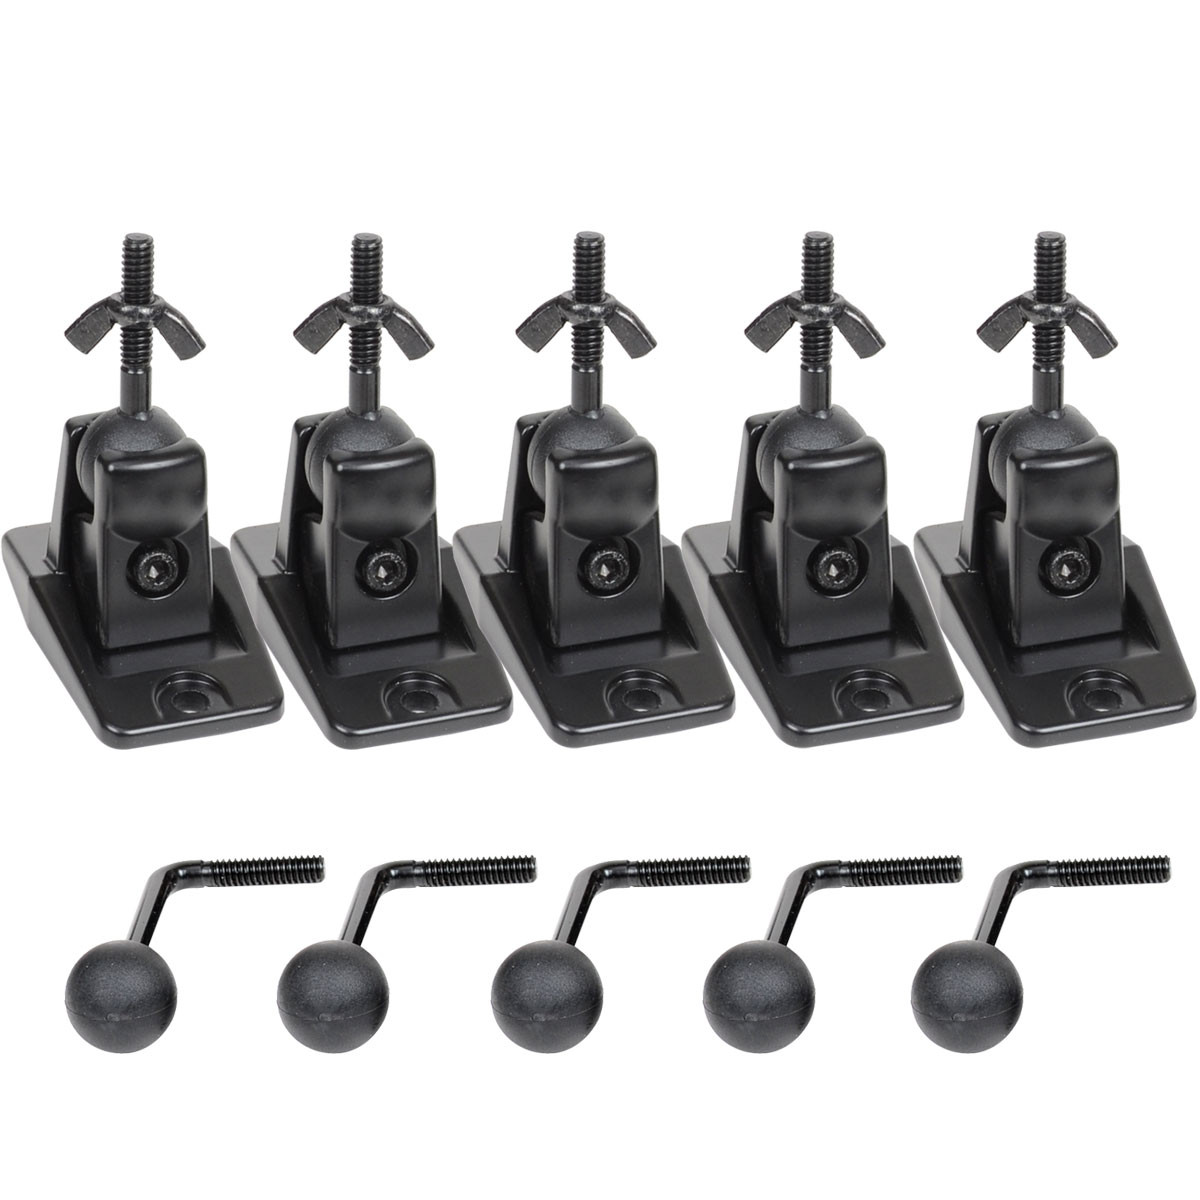 VideoSecu 5 Packs of Ceiling Wall Speaker Mount Satellite Surround Sound Home Theater Brackets bsn - image 2 of 4